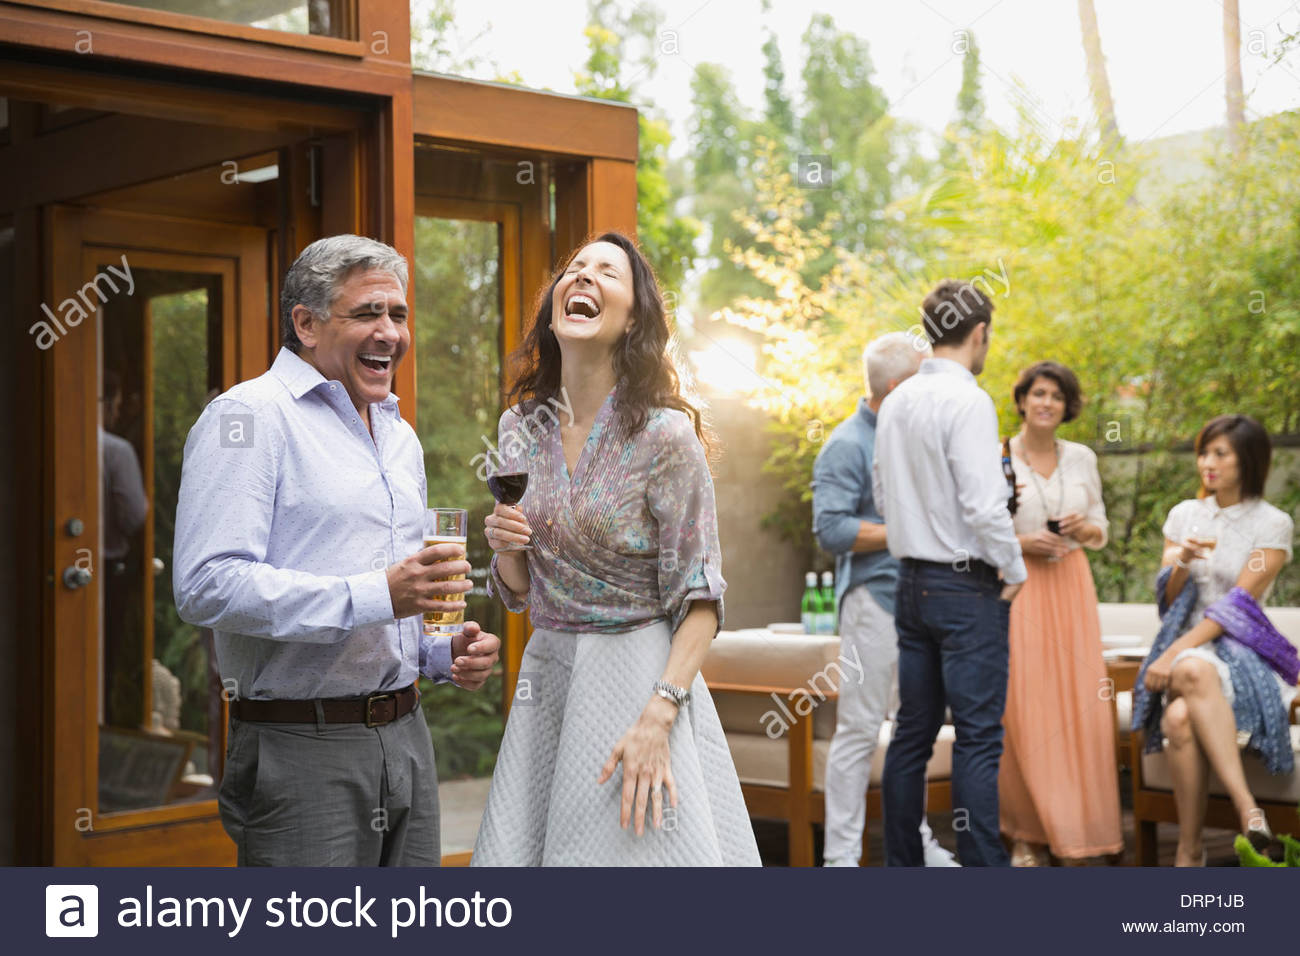 Cheerful couple enjoying outdoor party Banque D'Images